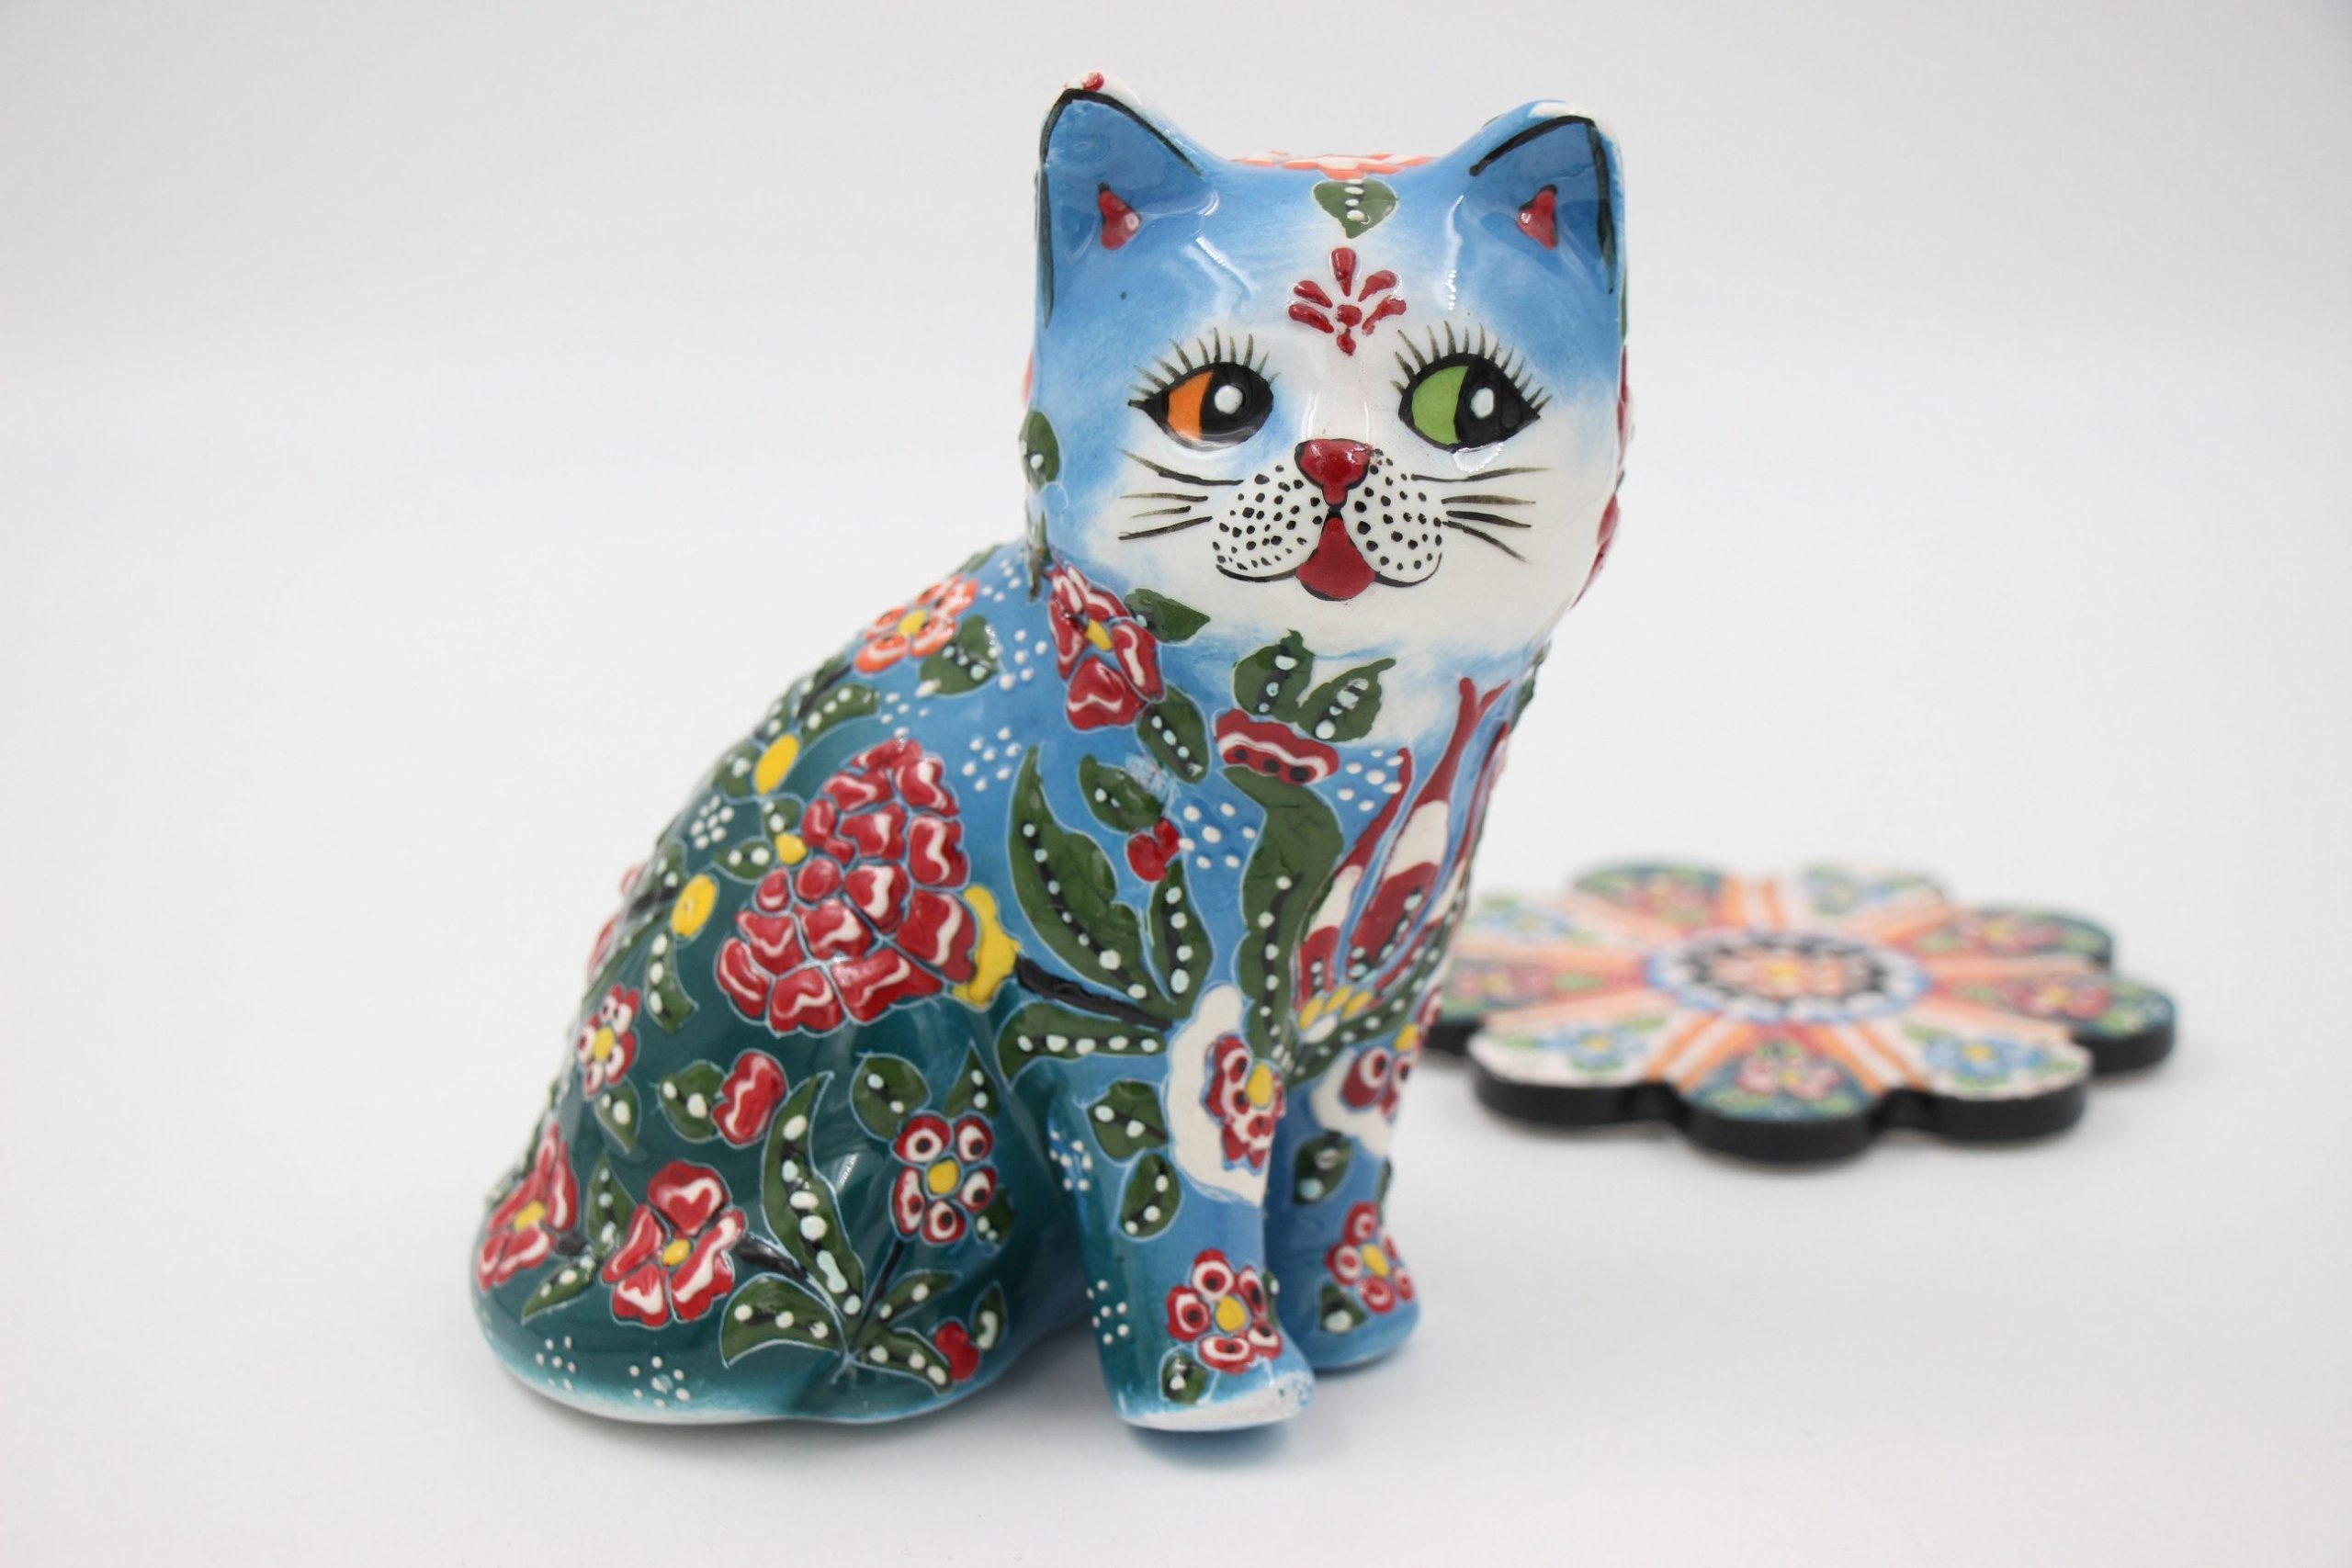 Hand-Painted Ceramic Cat Figurines from Peru (Set of 3) - Colorful Kittens